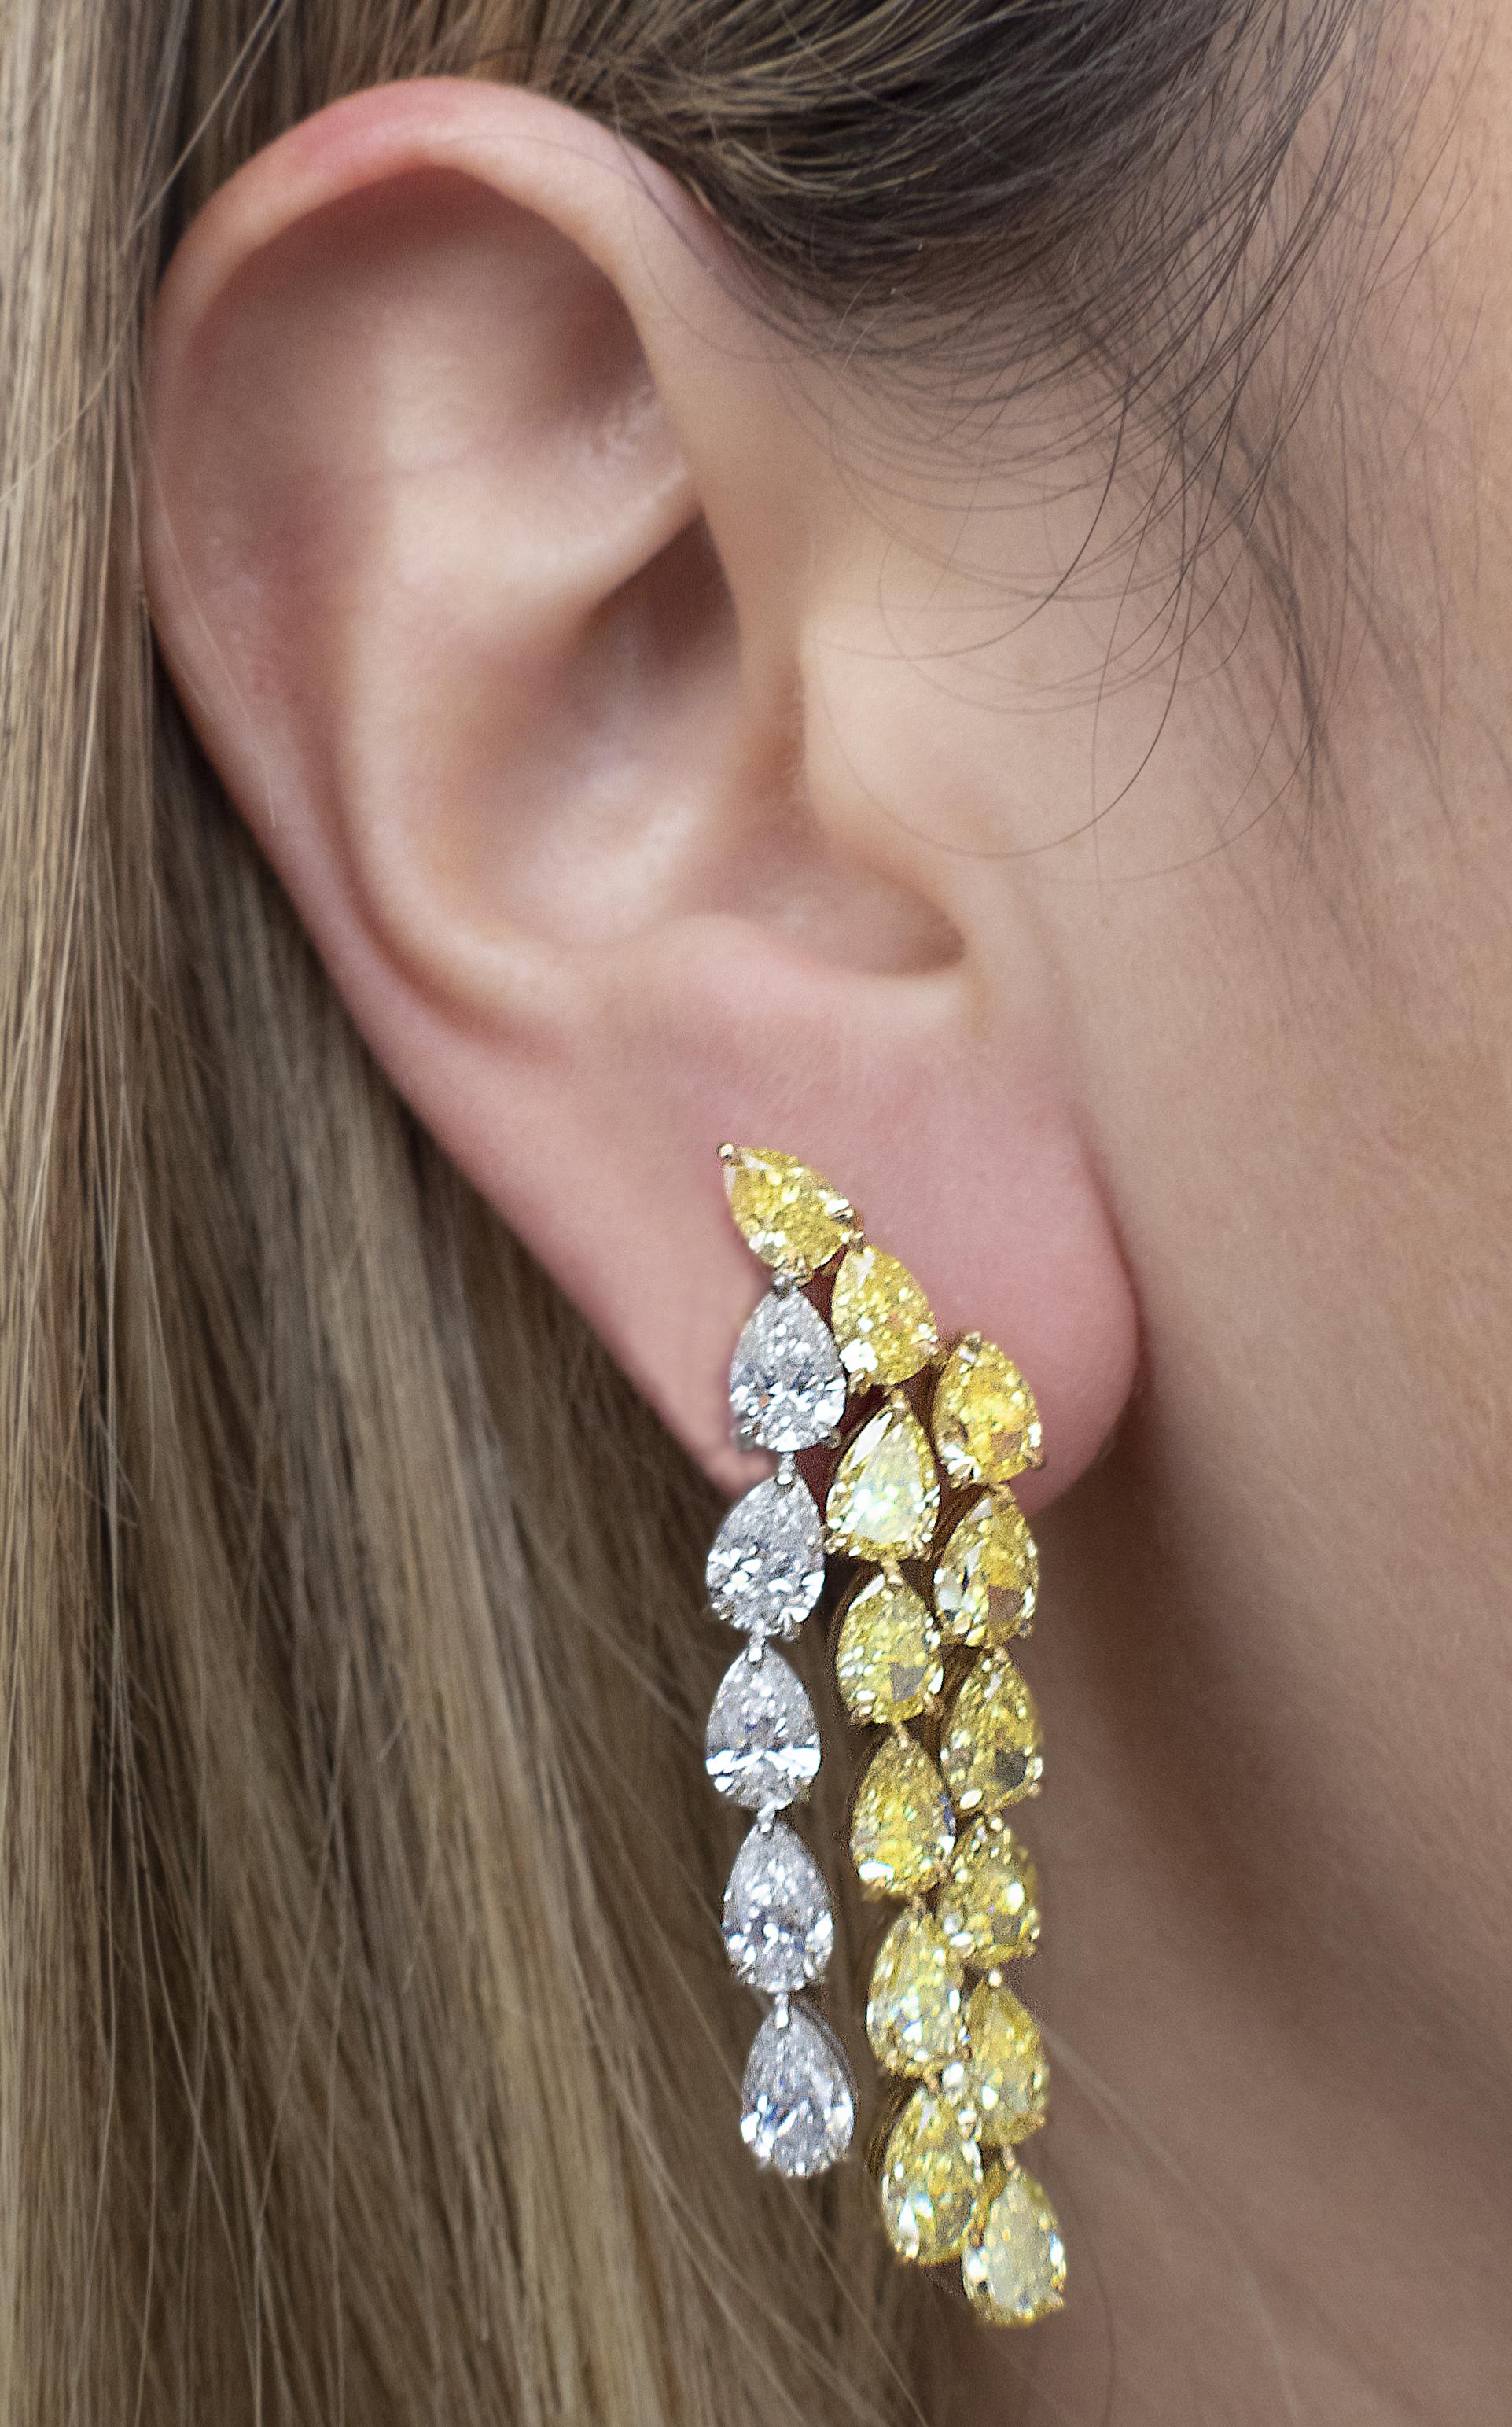 Captivating Vivid Diamonds platinum and 18k yellow gold dangle earrings, presenting a magnificent array of 36 GIA Certified, fancy intense yellow and white pear-shaped diamonds totaling 19.13 carats, with D-F color and VS1-SI1 clarity. These